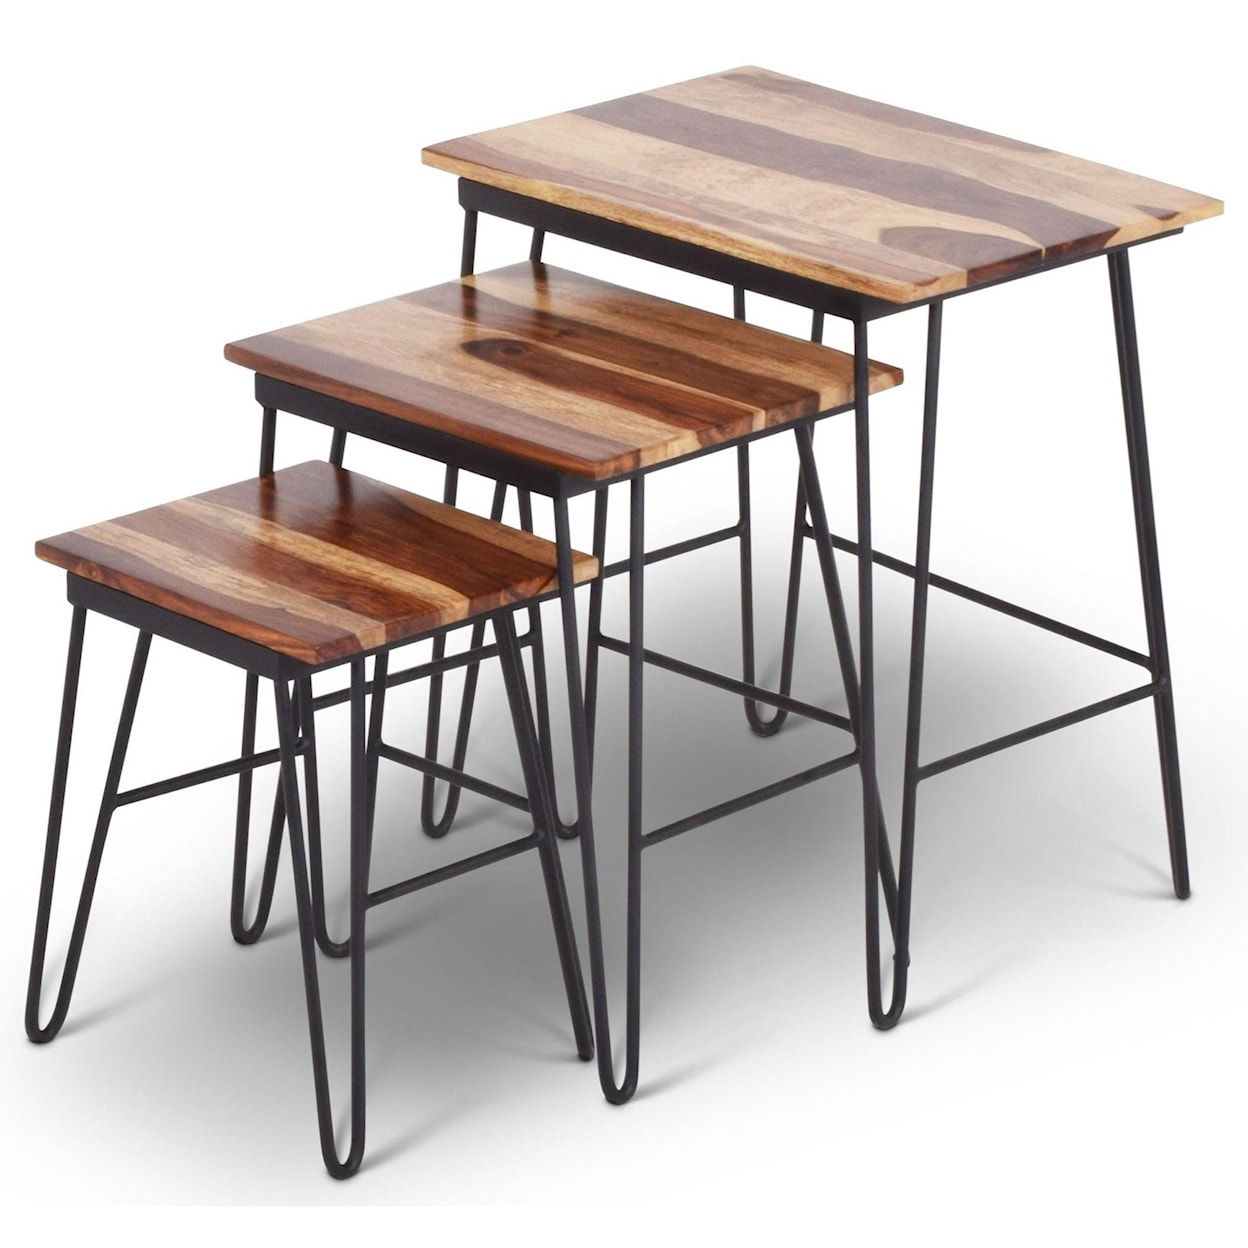 Prime India Accents Tristan Nesting Tables